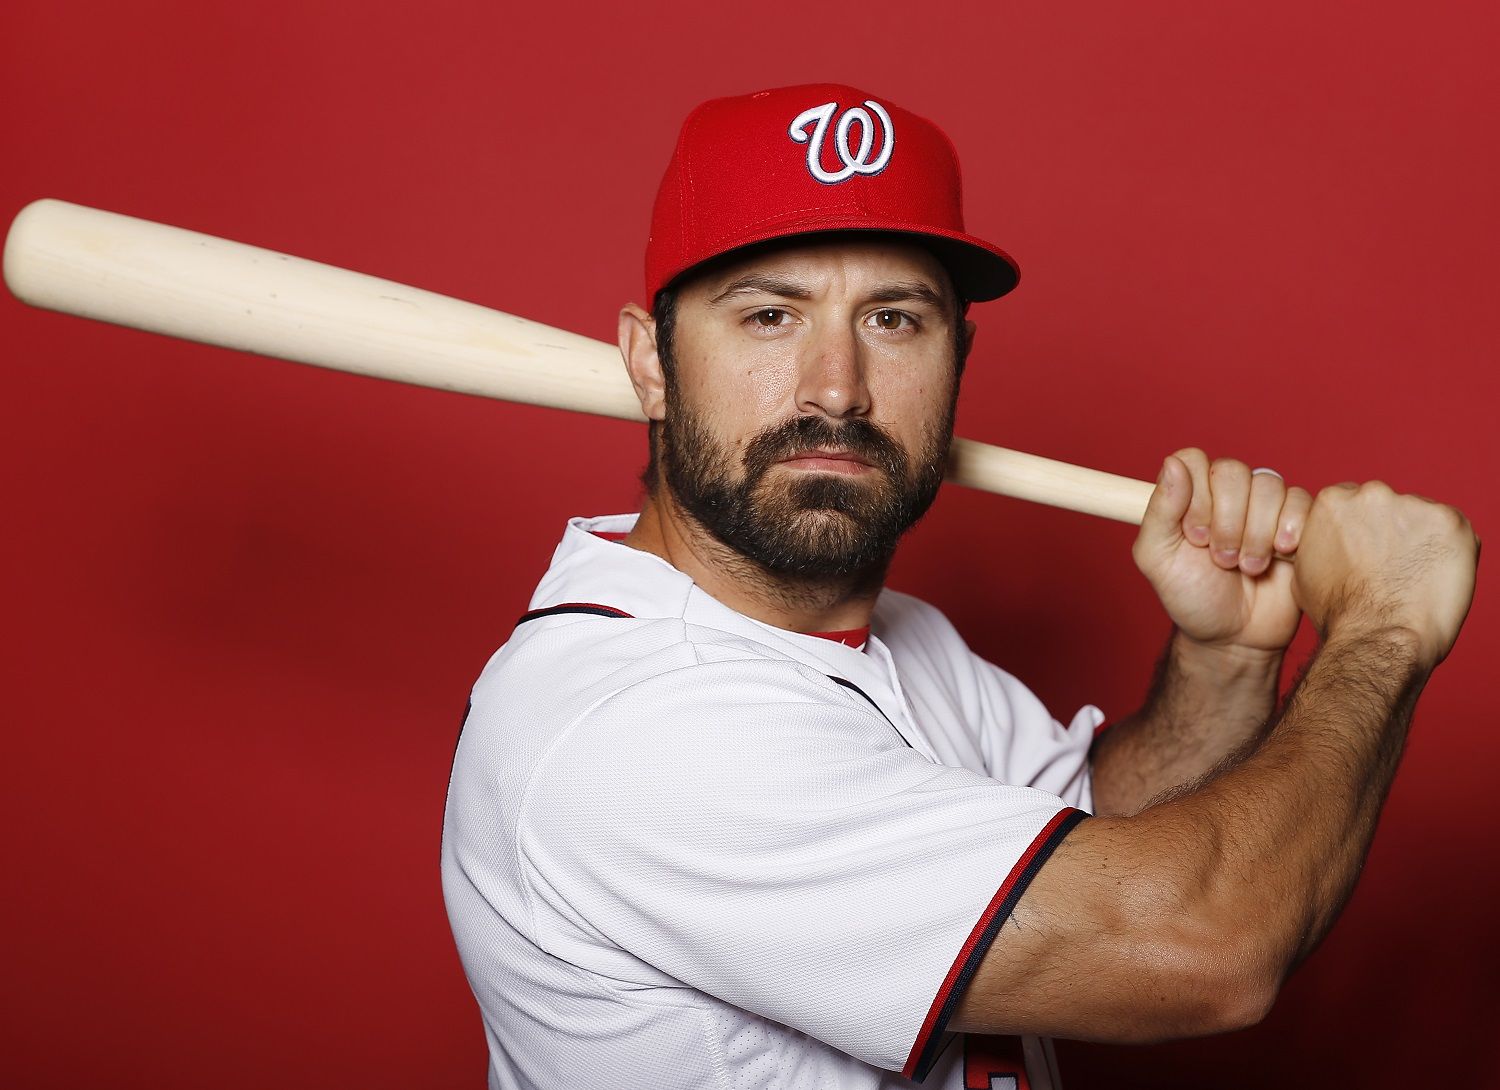 WEST PALM BEACH, FLORIDA - FEBRUARY 22:  Adam Eaton #2 of the Washington Nationals poses for a portrait on Photo Day at FITTEAM Ballpark of The Palm Beaches during on February 22, 2019 in West Palm Beach, Florida. (Photo by Michael Reaves/Getty Images)